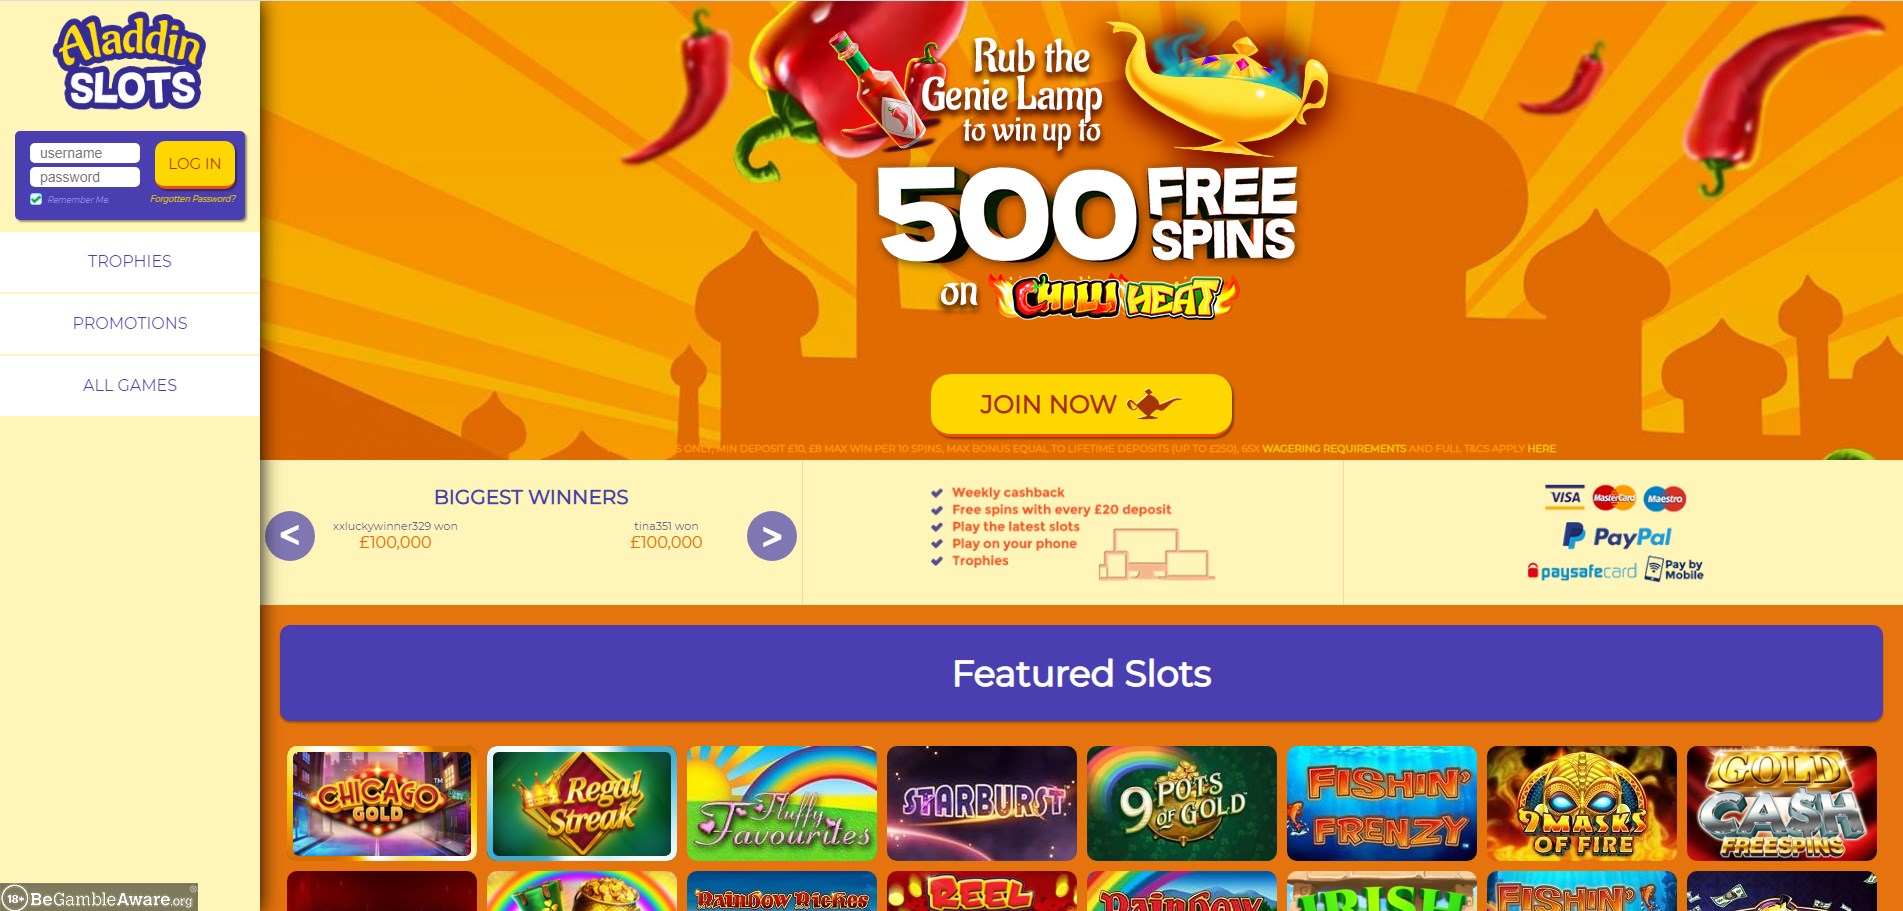 Payday Slots Casino Review